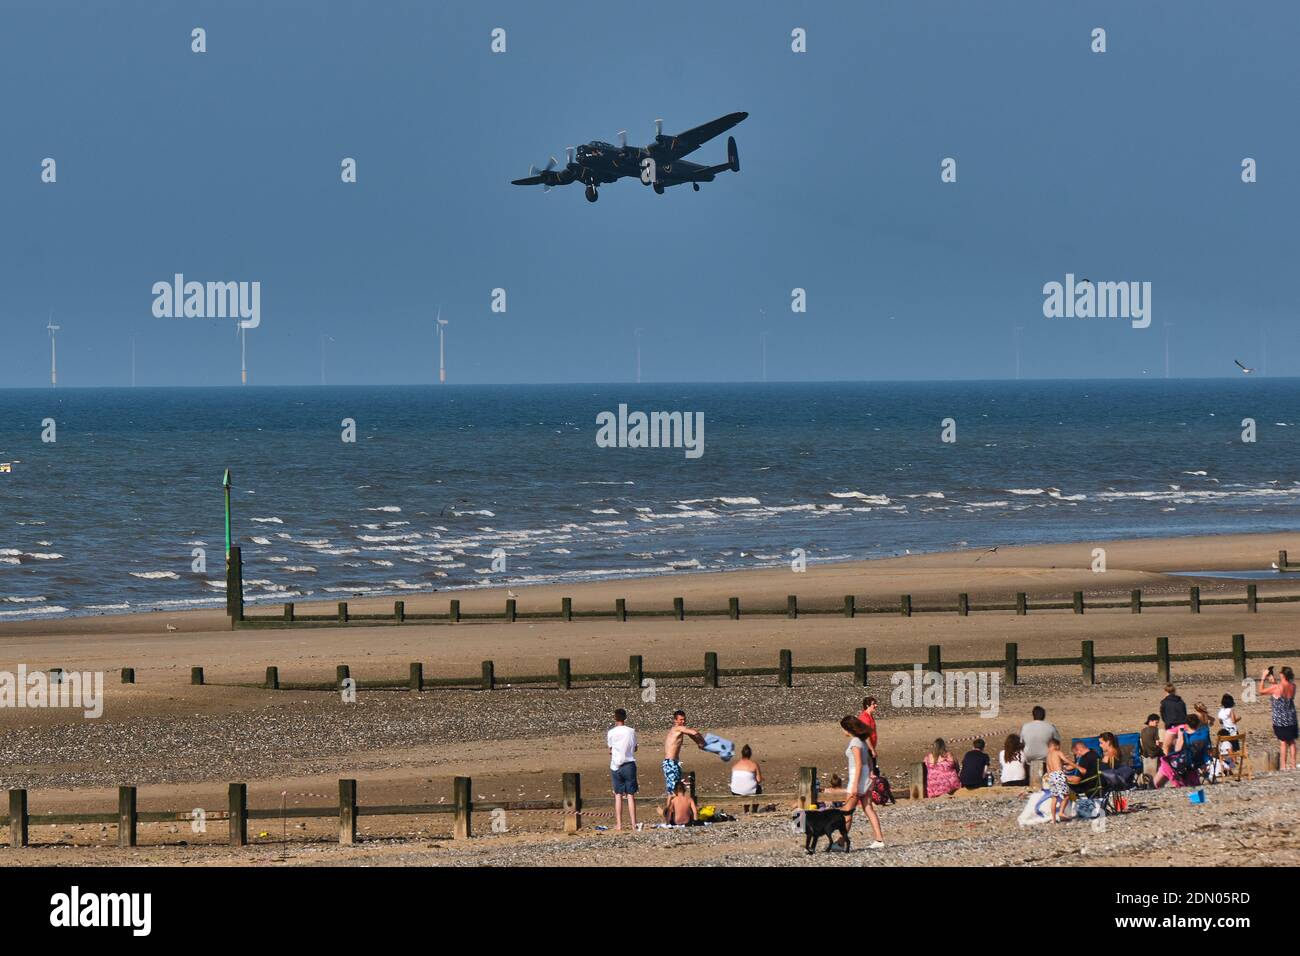 The Avro Lancaster of the Battle of Britain Memorial Flight makes a low, gear-down pass over the beach at the Rhyl Air Show 2019. Stock Photo